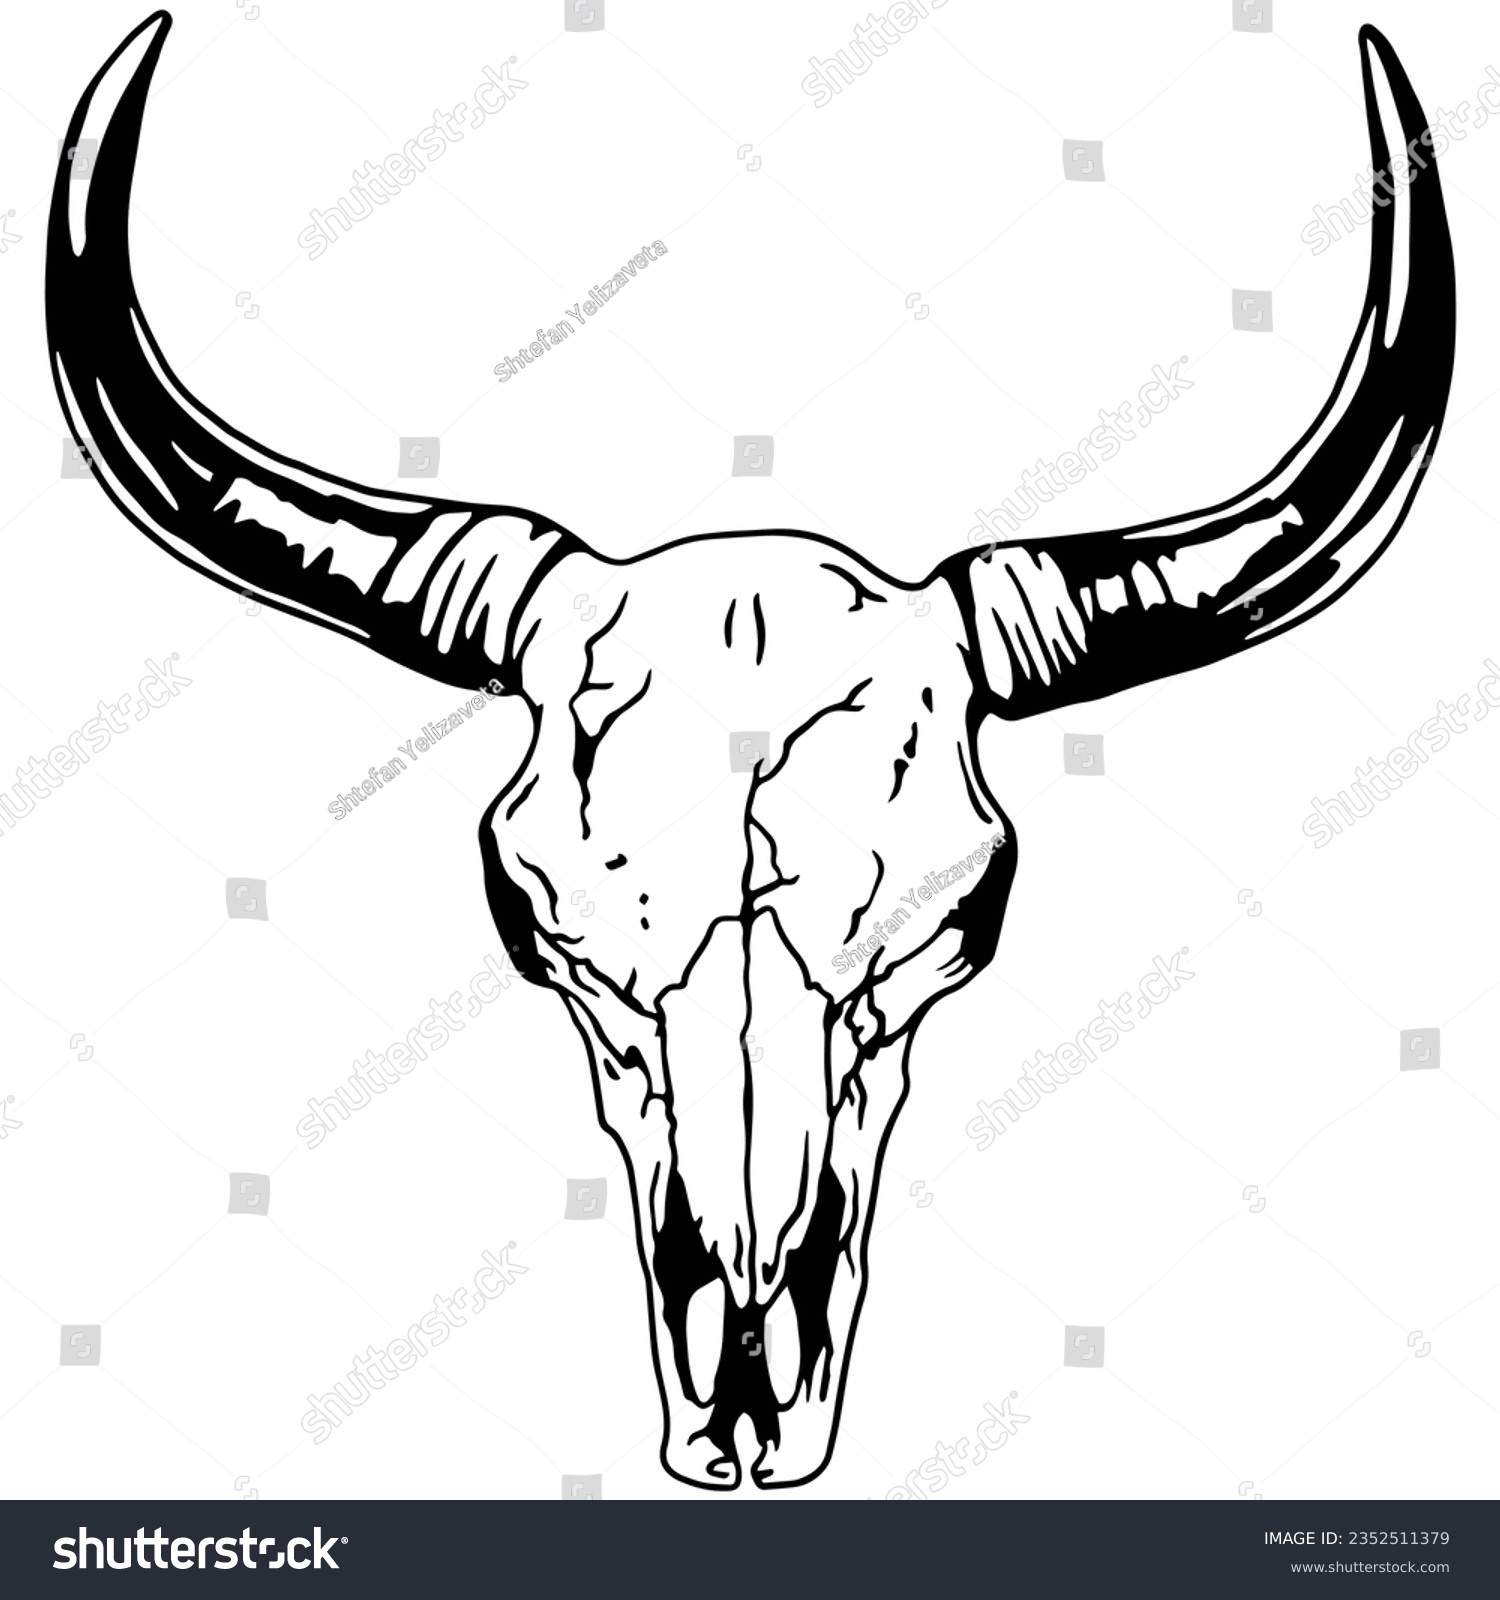 SVG of Texas Longhorn, Country Western Bull Cattle Vintage Label Logo Design. Vector hand drawing of the head of a bull skull on a white background. svg